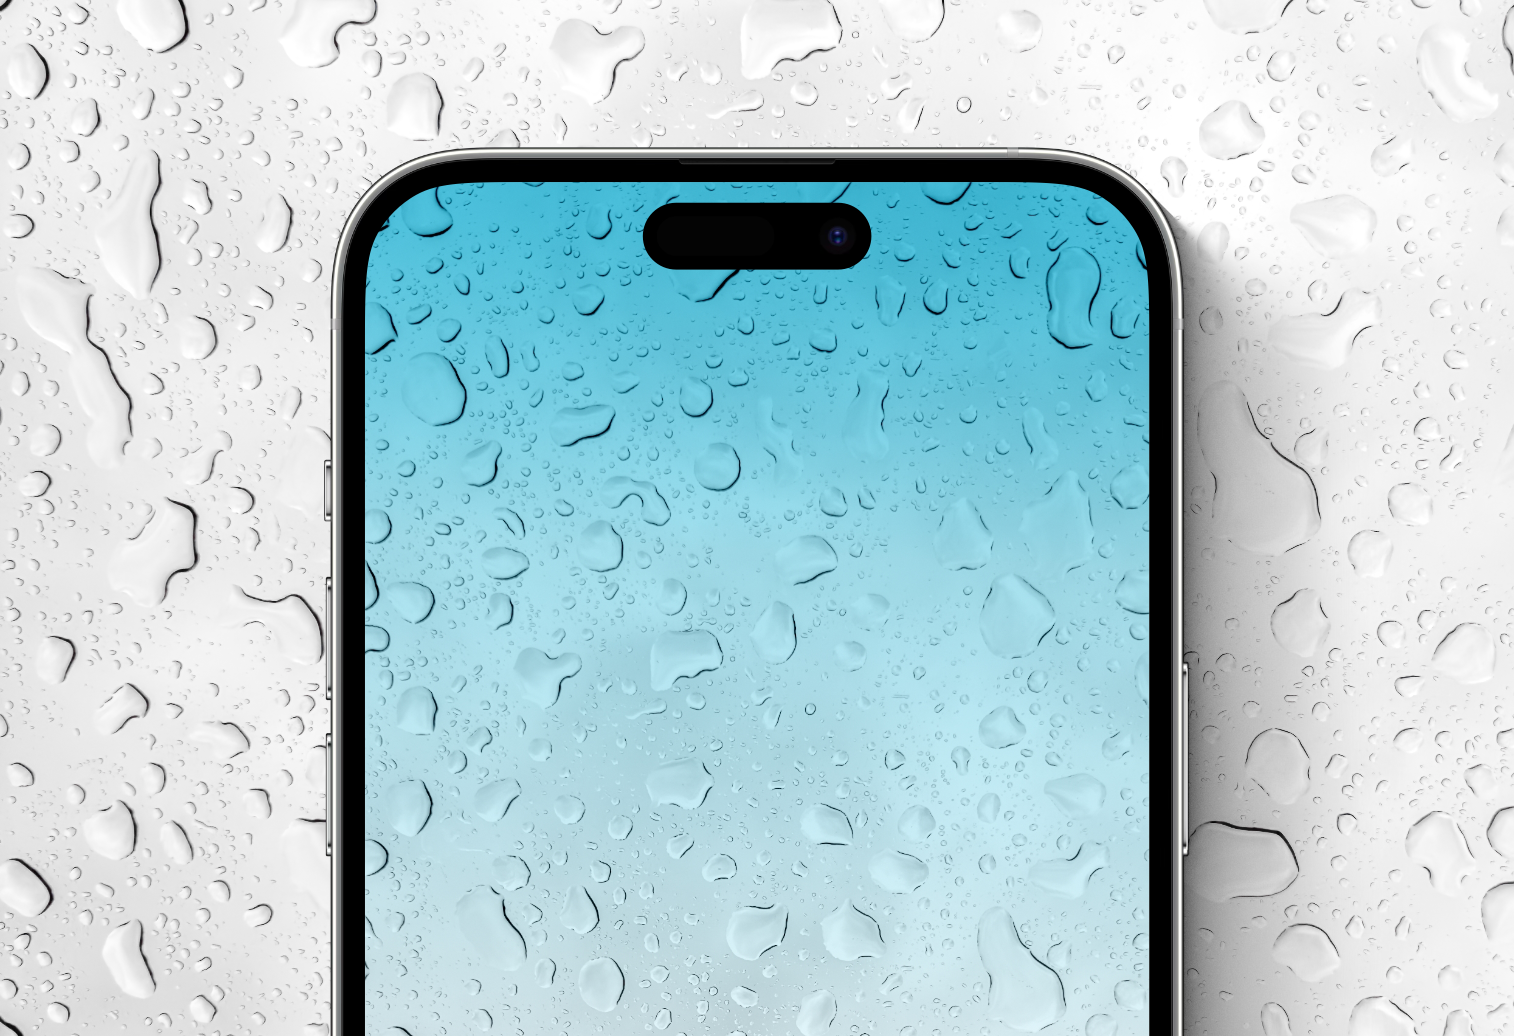 Download iPhone 11 wallpapers for your iPhone  AppleMagazine